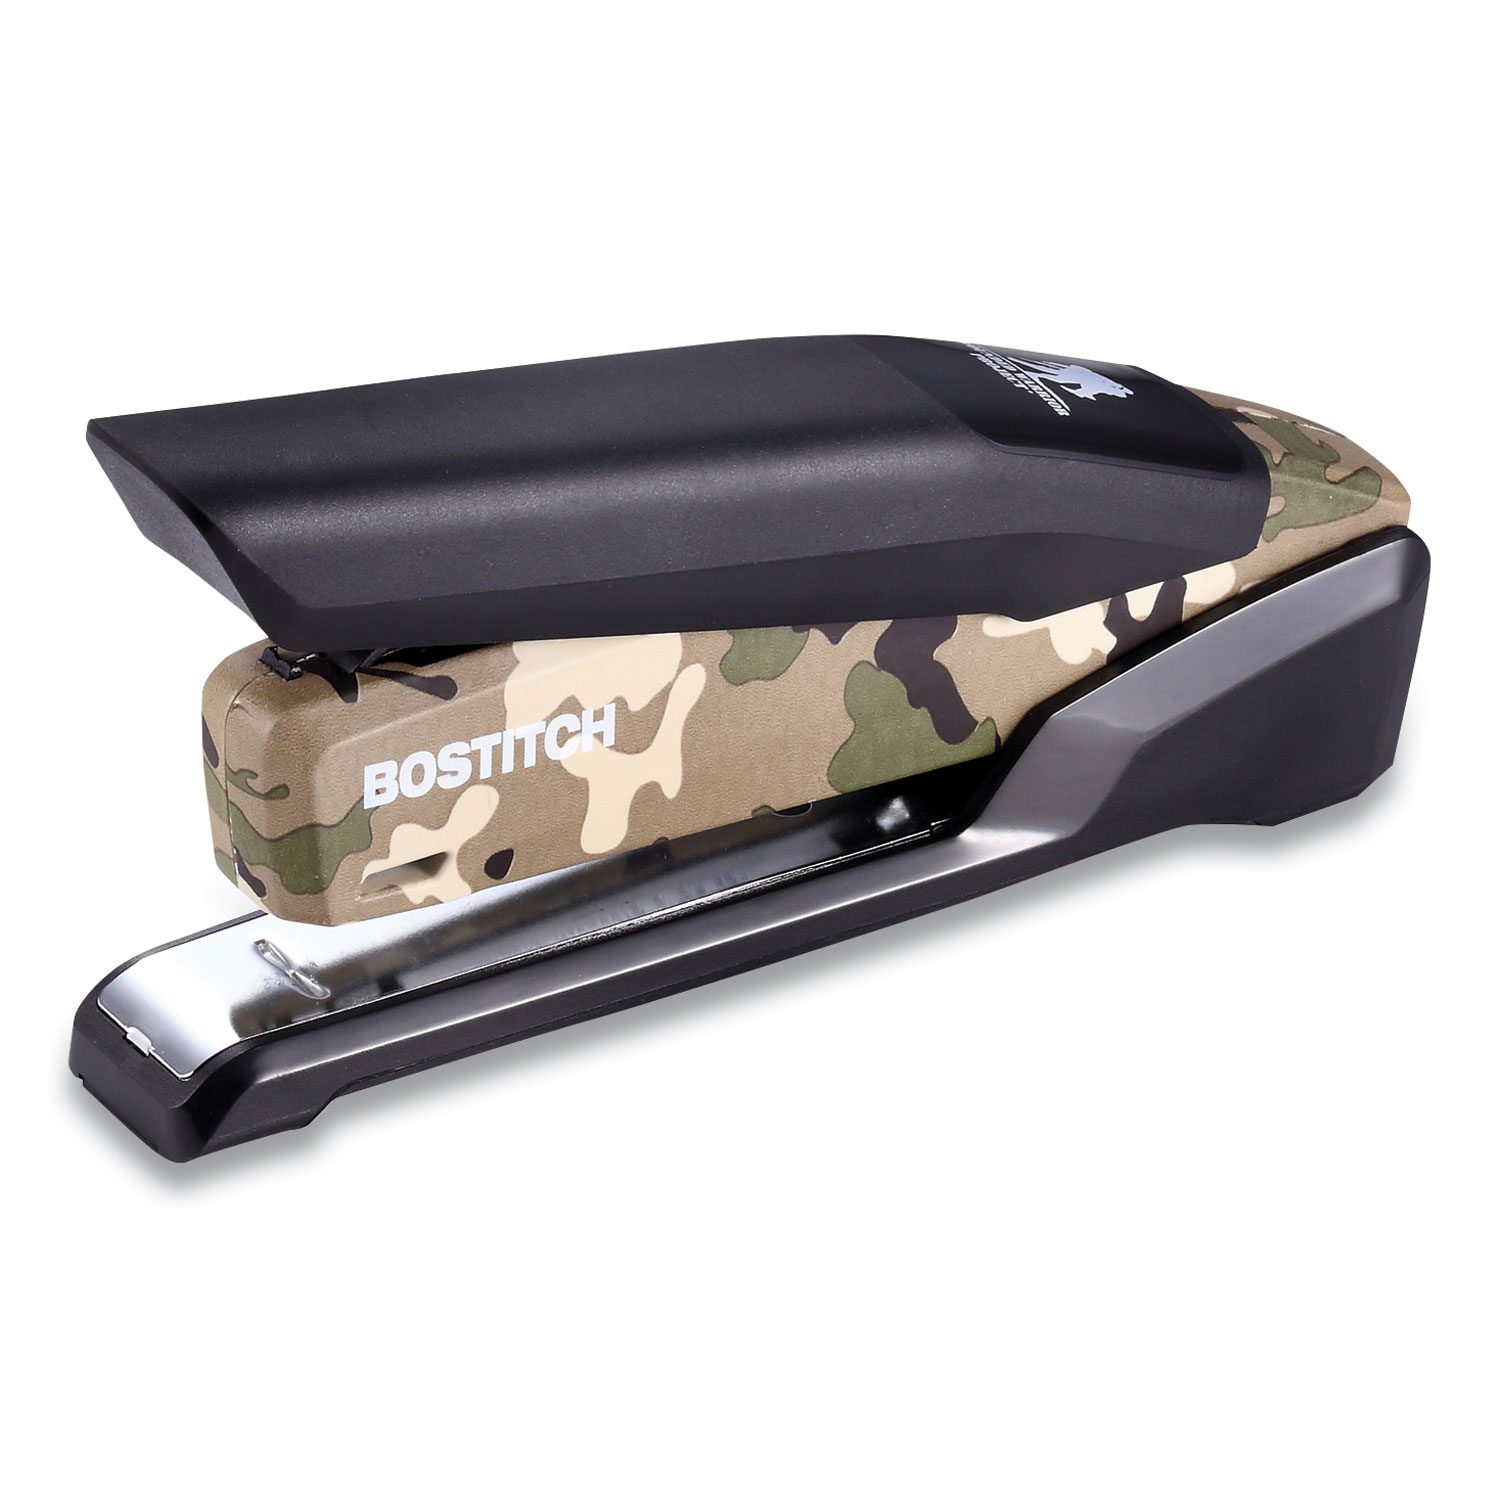 Bostitch® Wounded Warrior Project Desktop Stapler, 28-Sheet Capacity, Black/Camouflage